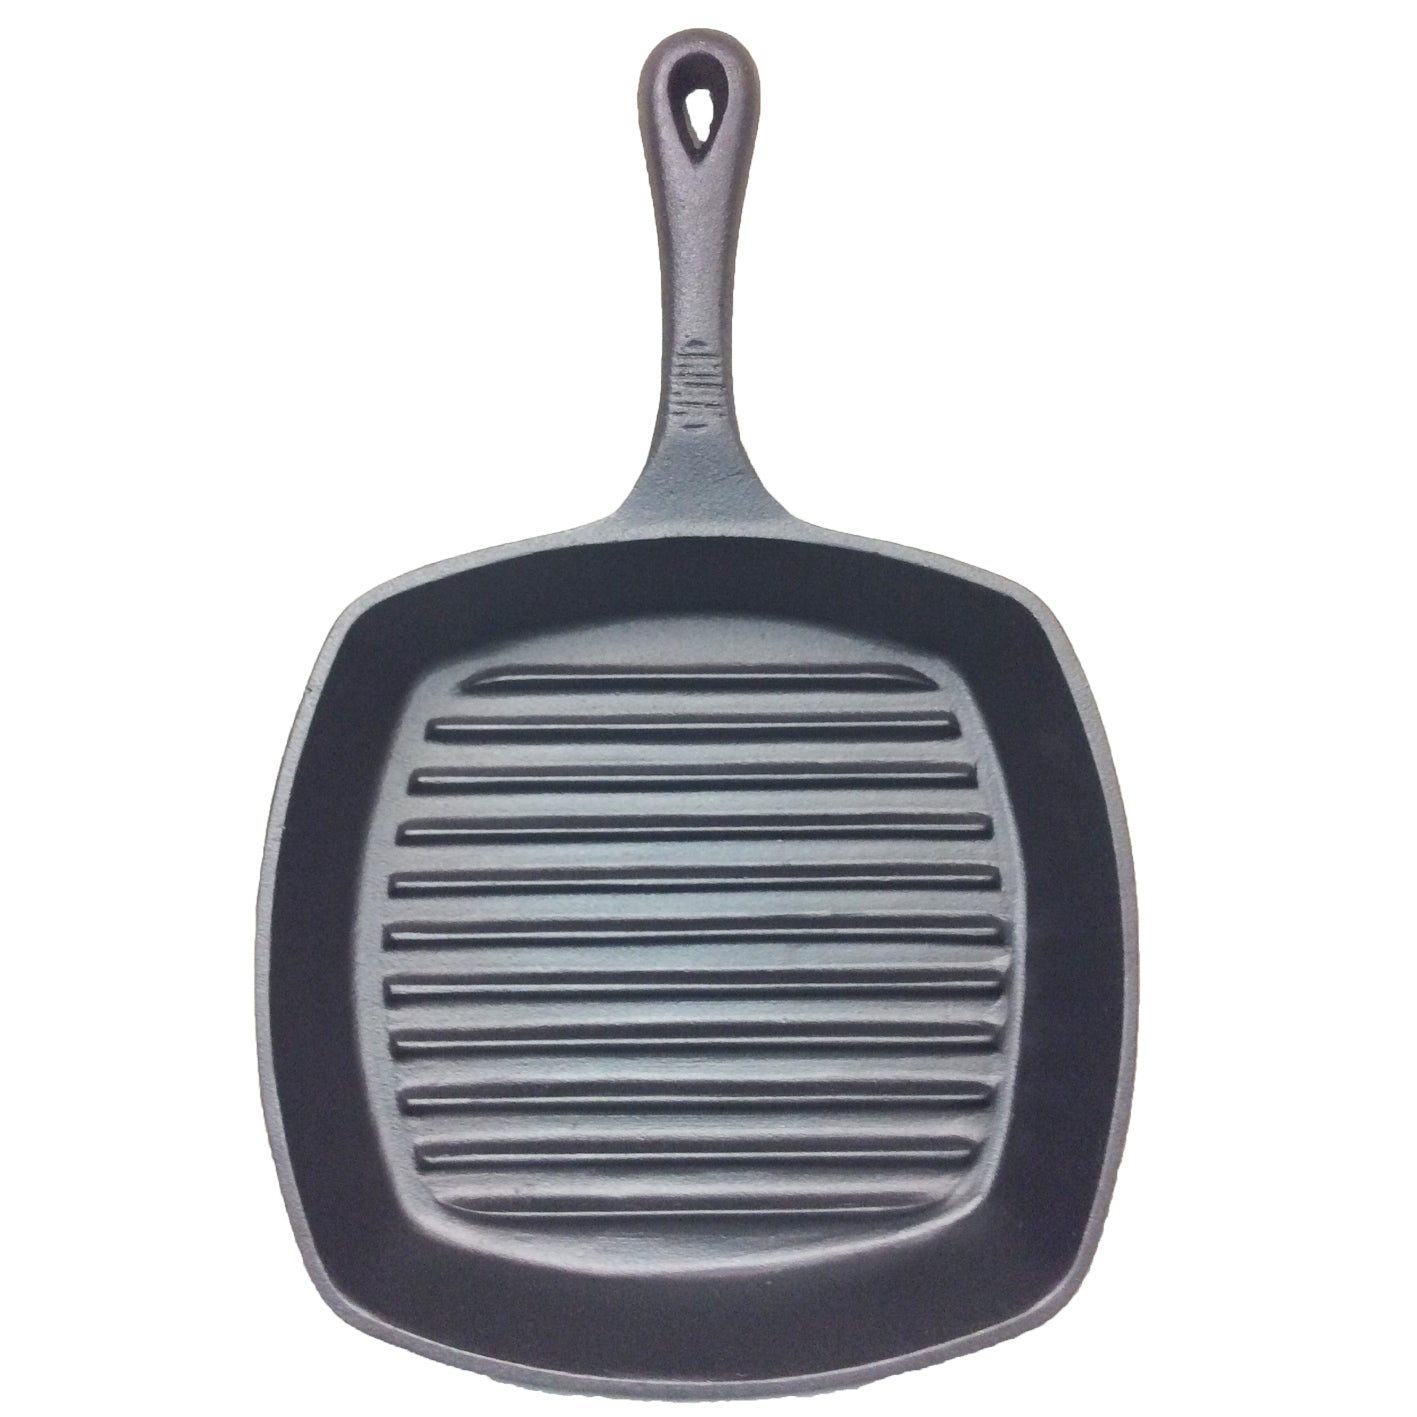 Pre-seasoned square grill pan with handle, 10.25"